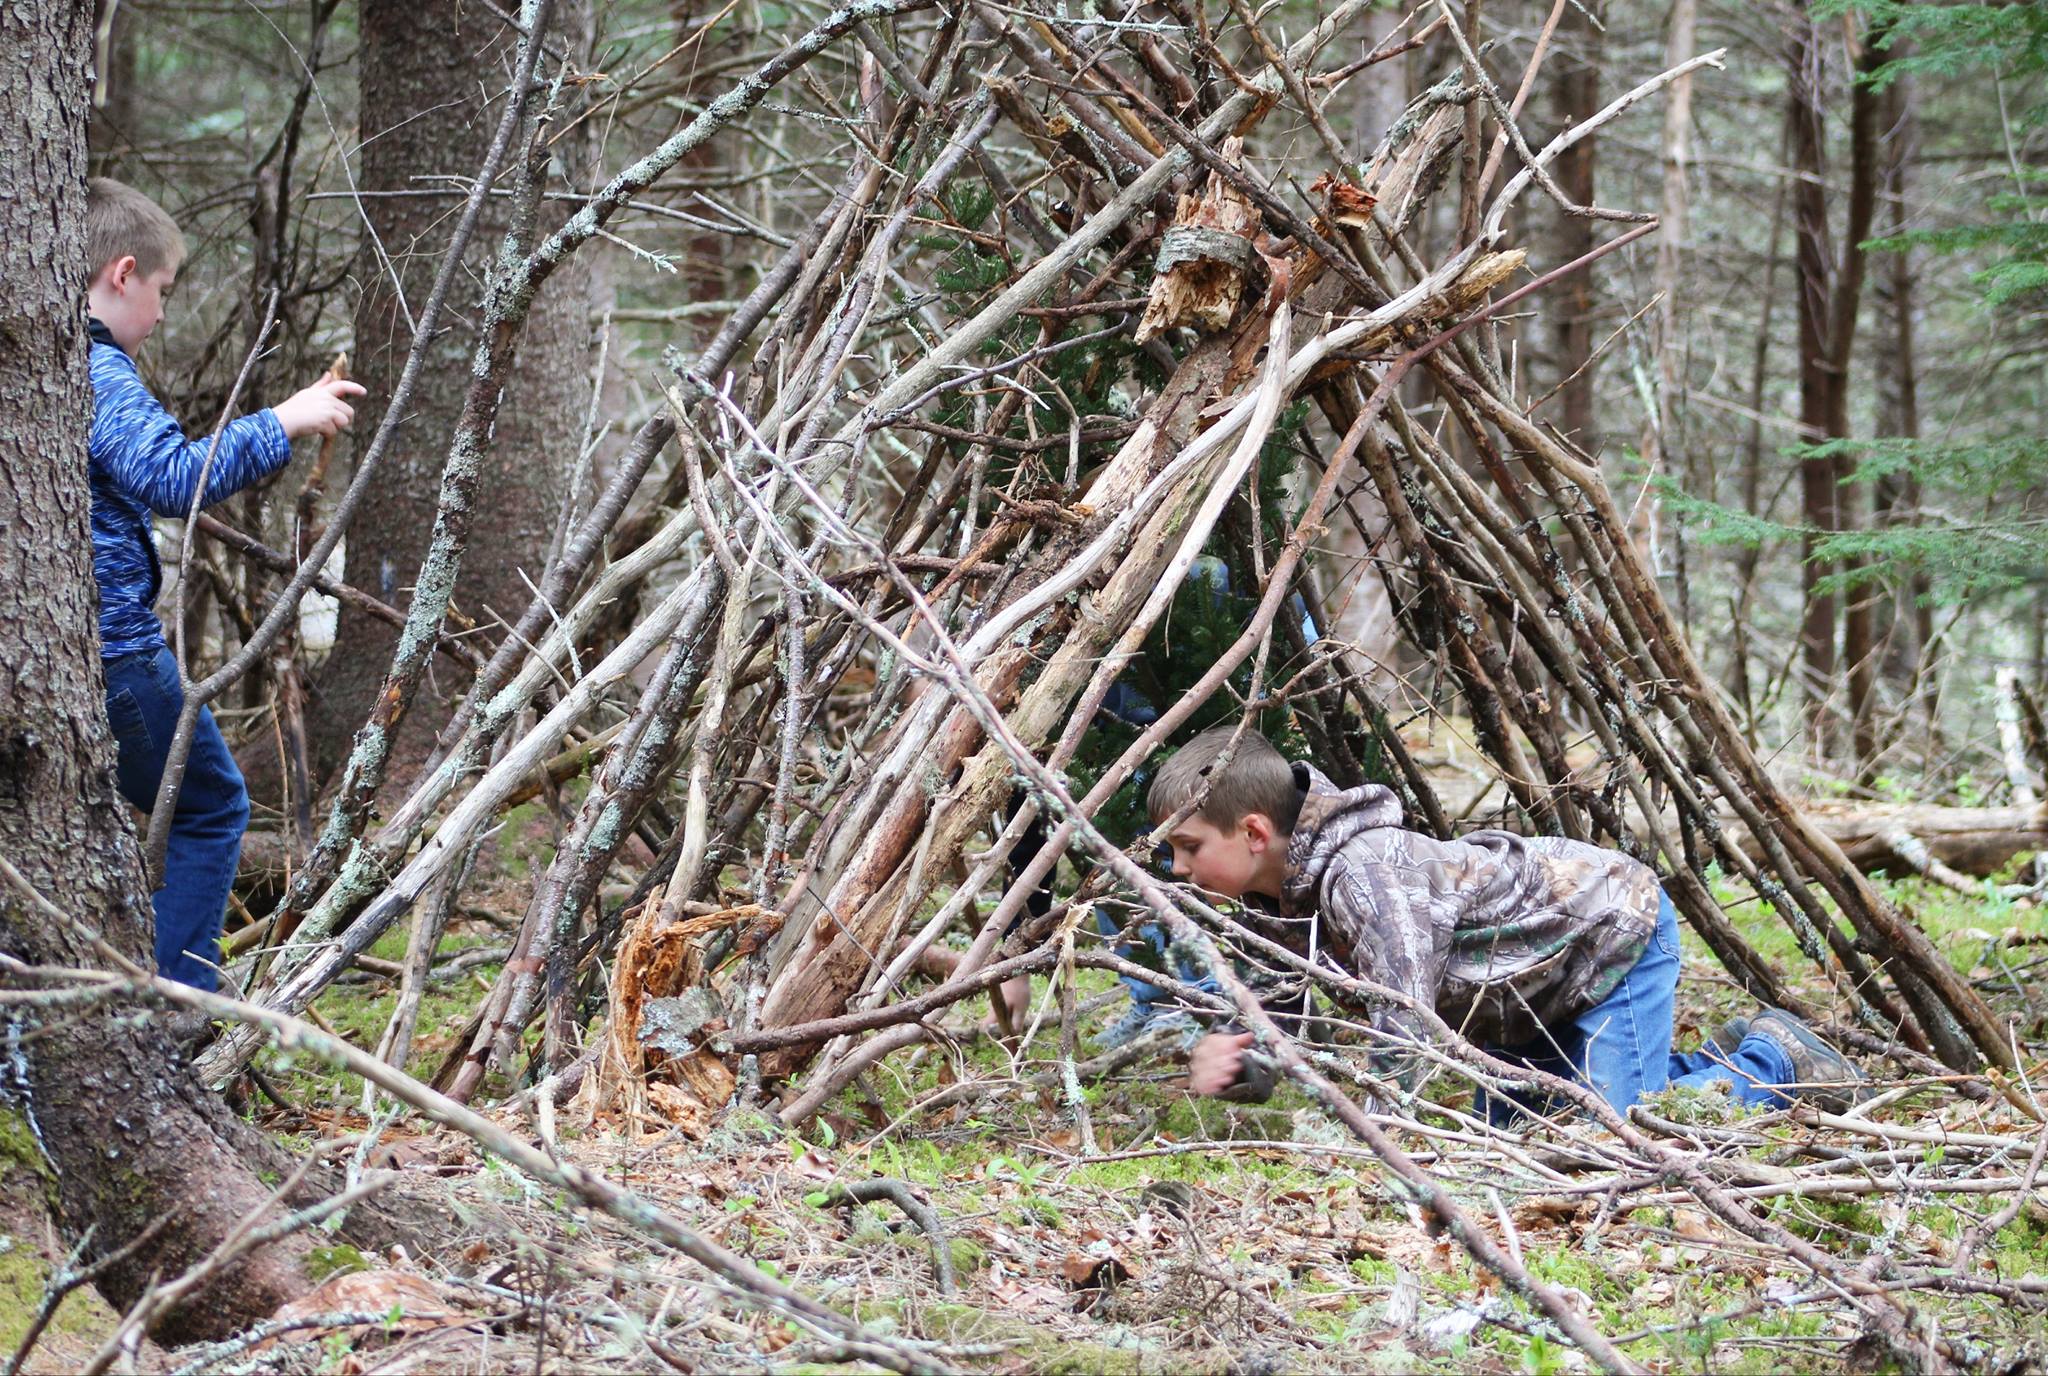 Two children work in the woods behind Milbridge Elementary School in Milbridge, Maine to build a shelter and outdoor classroom. Milbridge Elementary School partners with the organization Transforming Rural Experiences in Education (TREE) to provide trauma-informed outdoor learning experiences to students in rural Maine. Photo Credit: Donald Parker